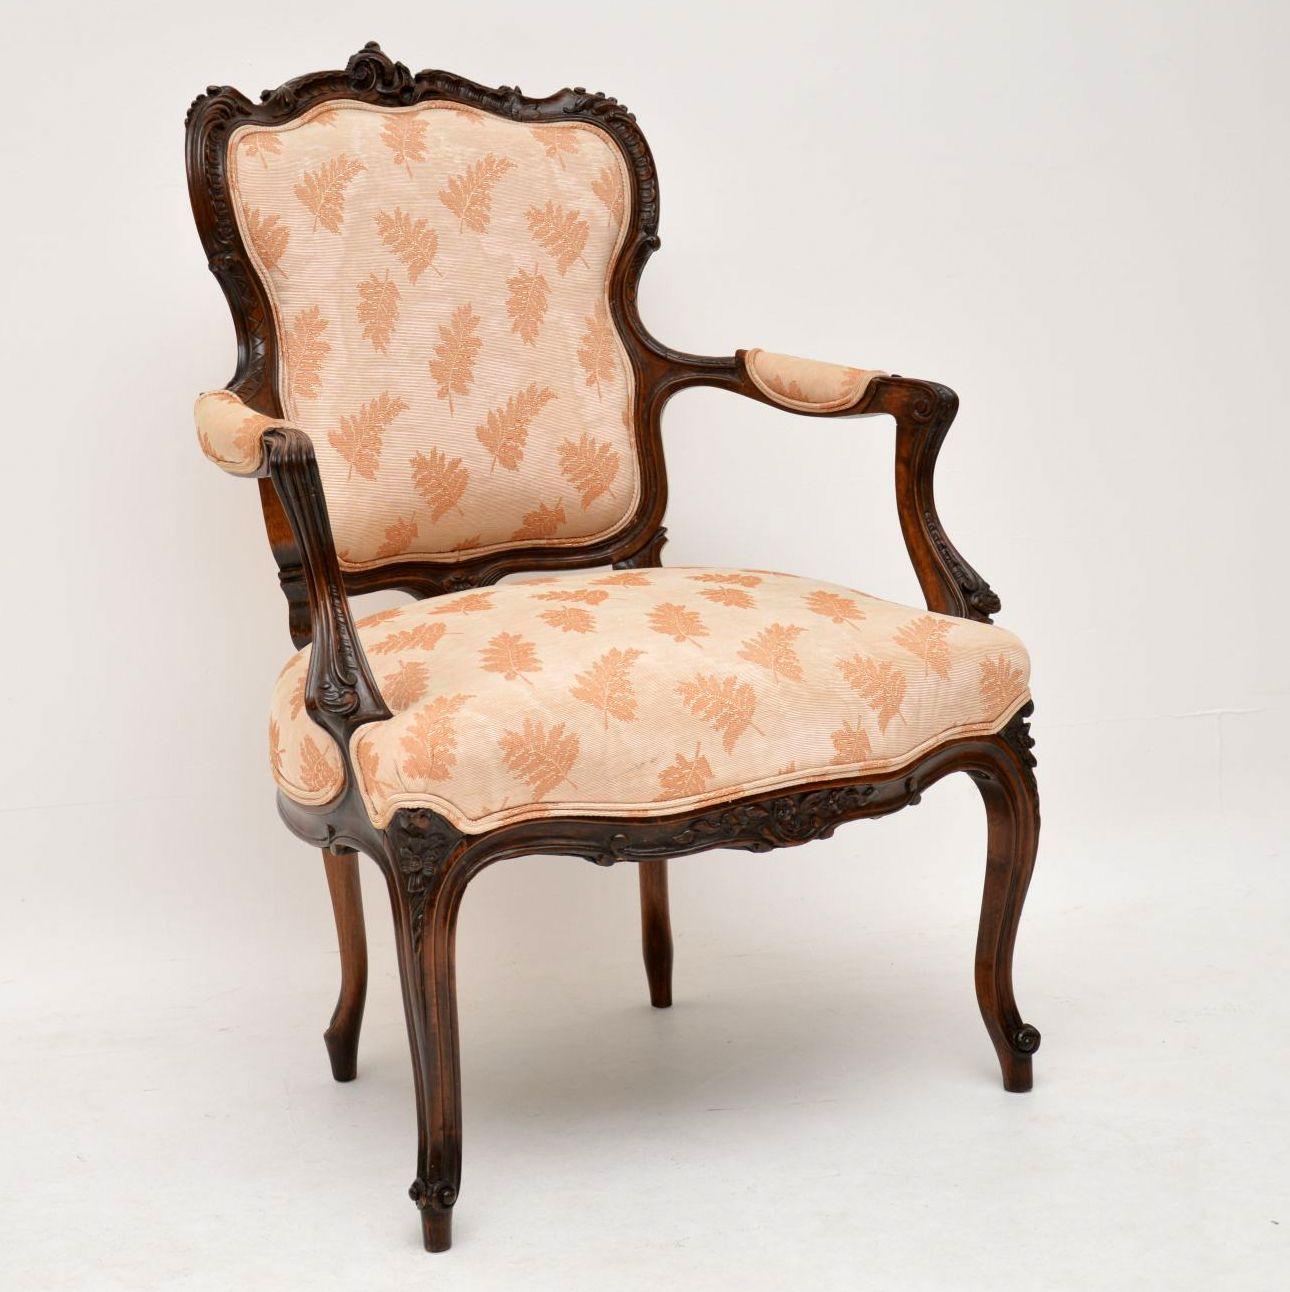 French antique walnut salon armchair in good original condition, dating roughly from the 1880s period. It’s finely carved all-over and the carving is very crisp. This chair is structurally sound and the upholstery is still in good condition. It has